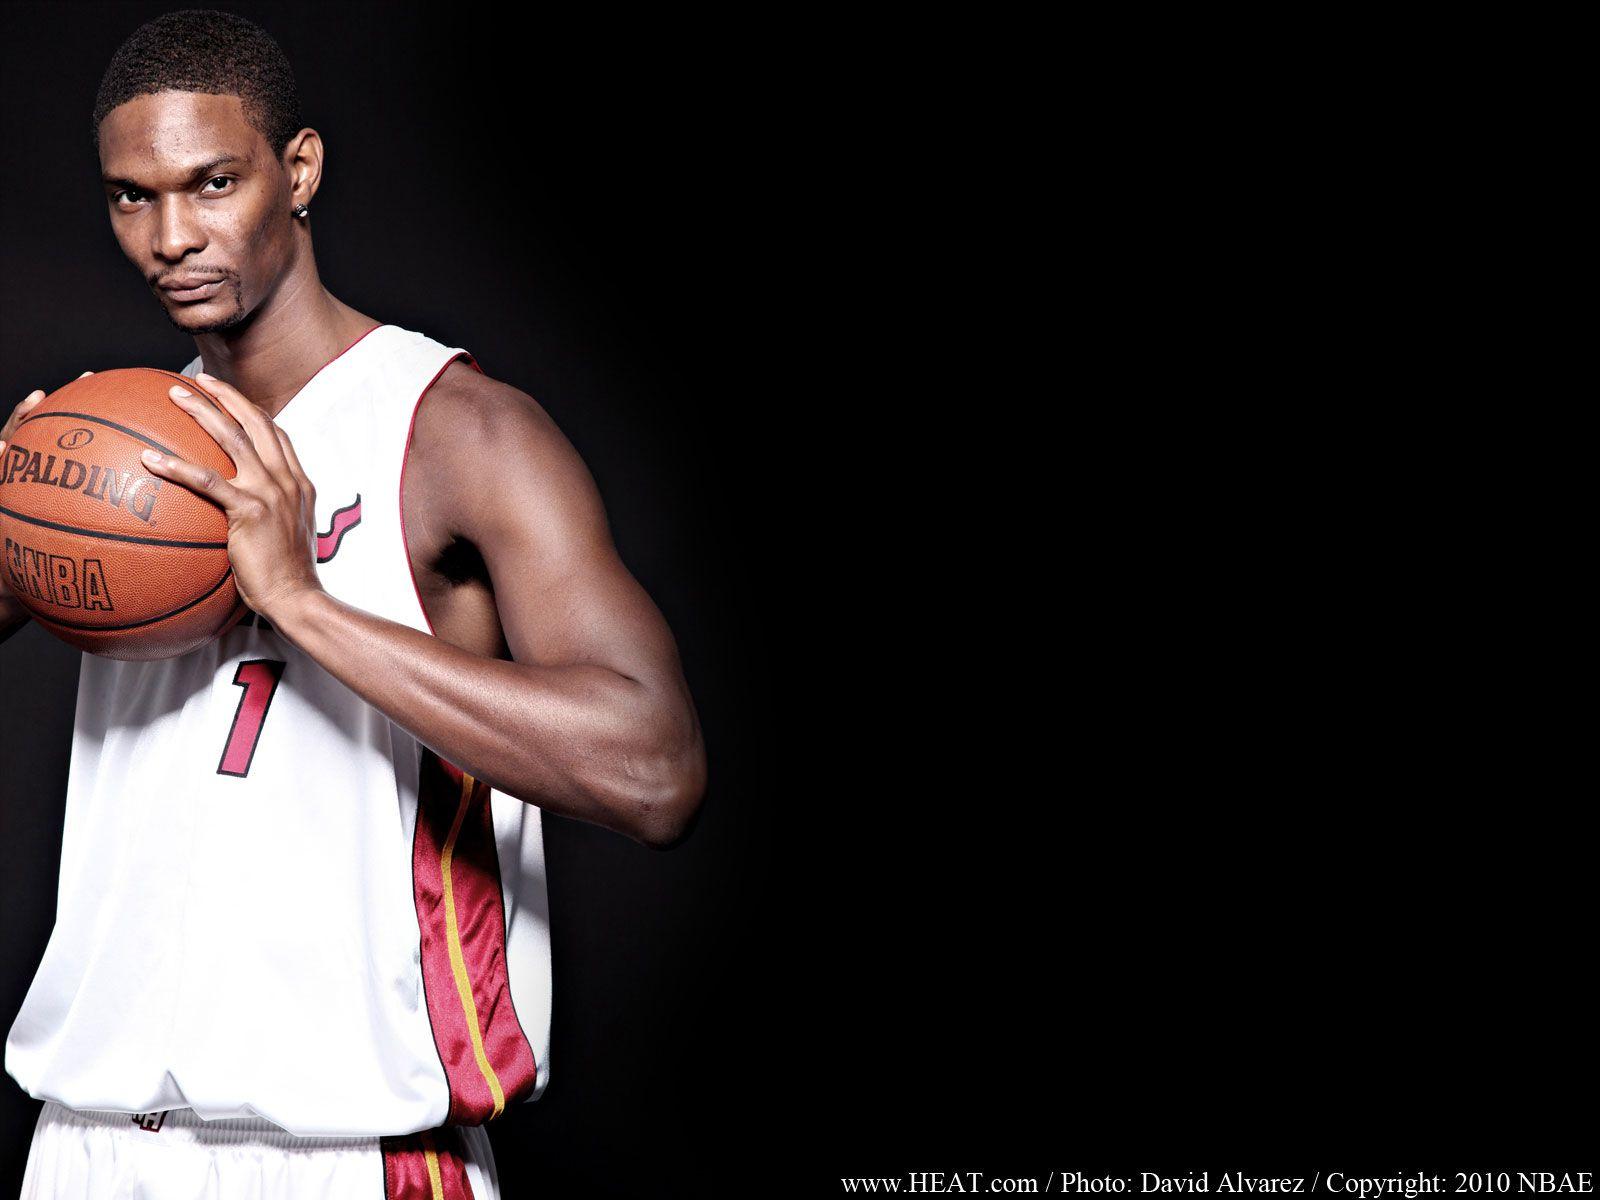 Chris Bosh Wallpaper High Resolution and Quality Download